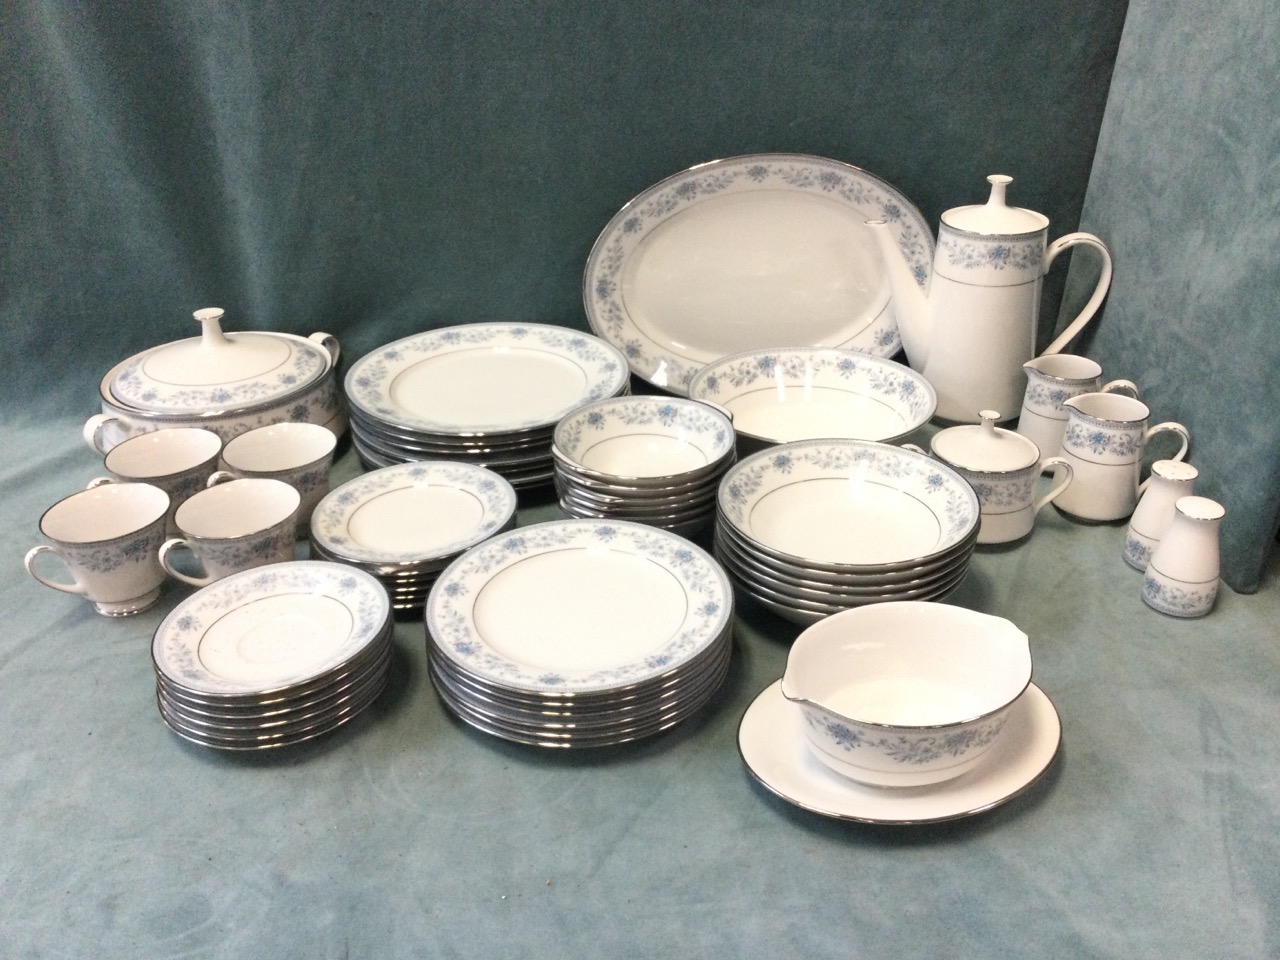 An extensive Noritake porcelain dinner service in the Blue Hill pattern with a covered tureen, an